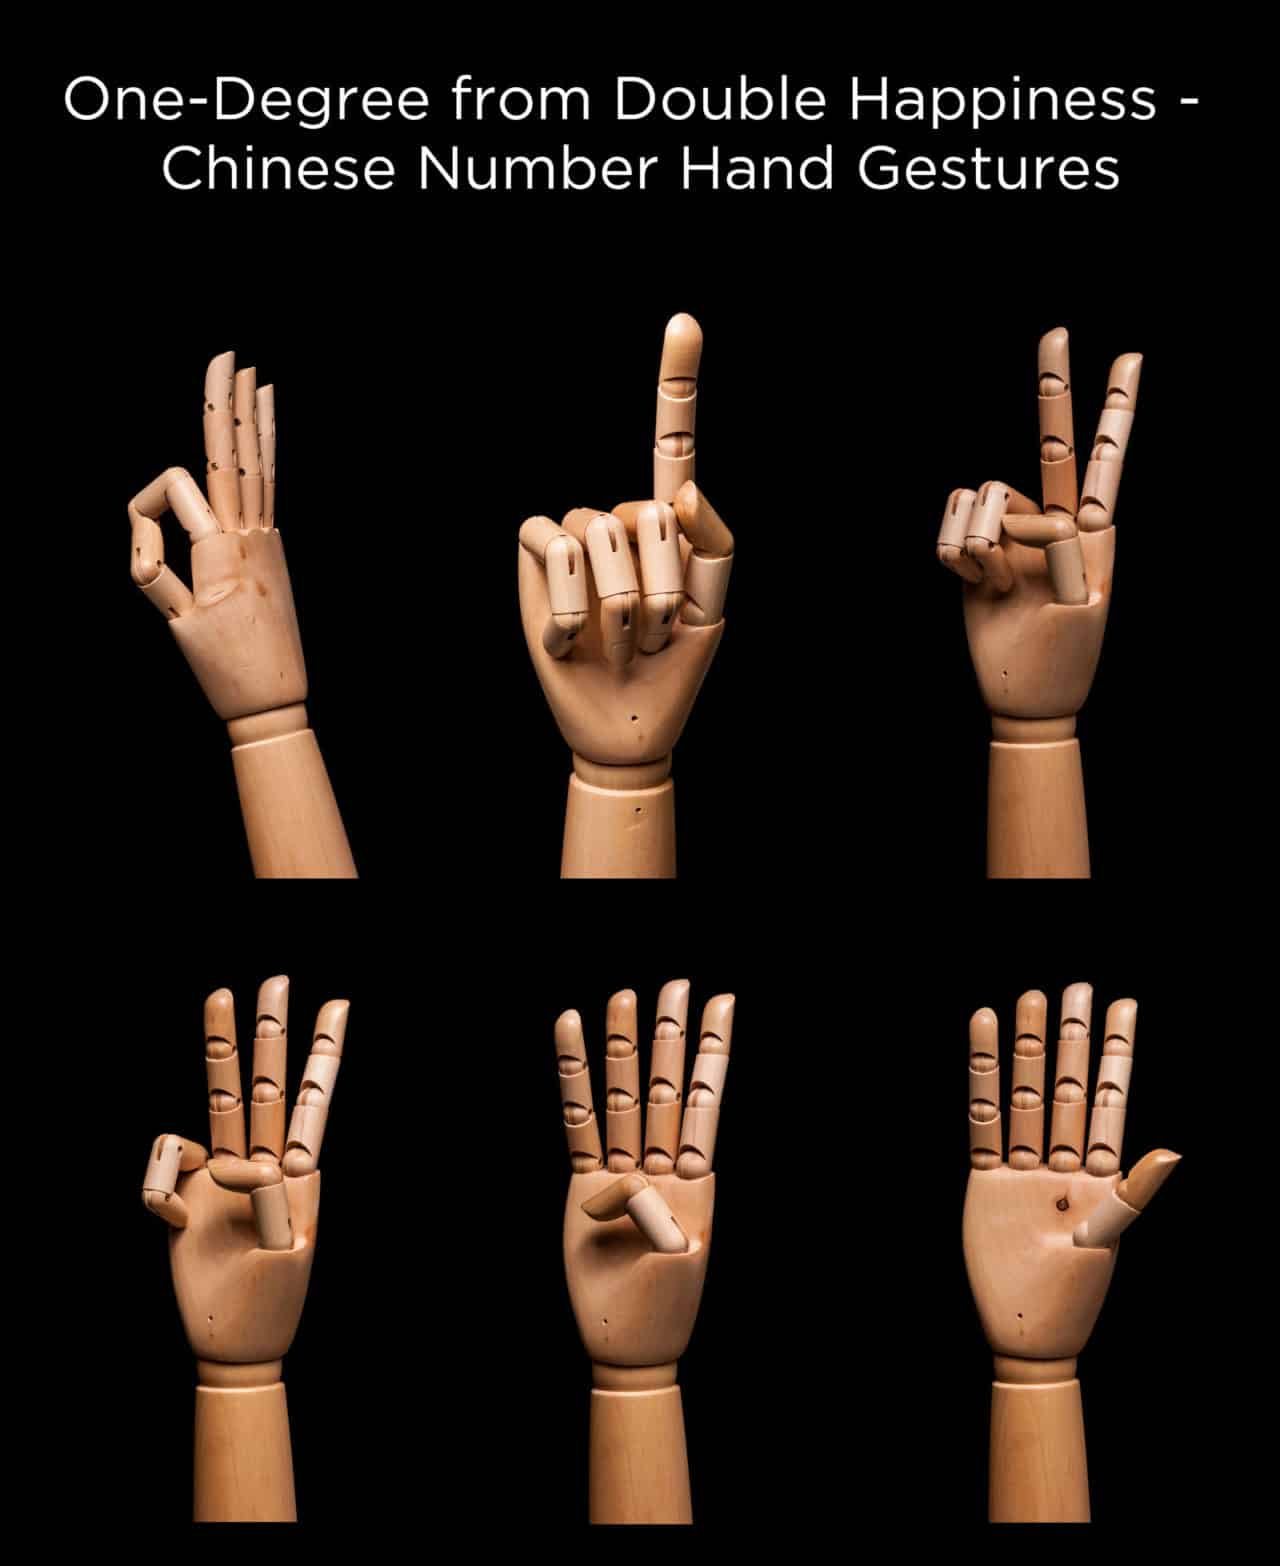 Chinese Number Hand Gestures